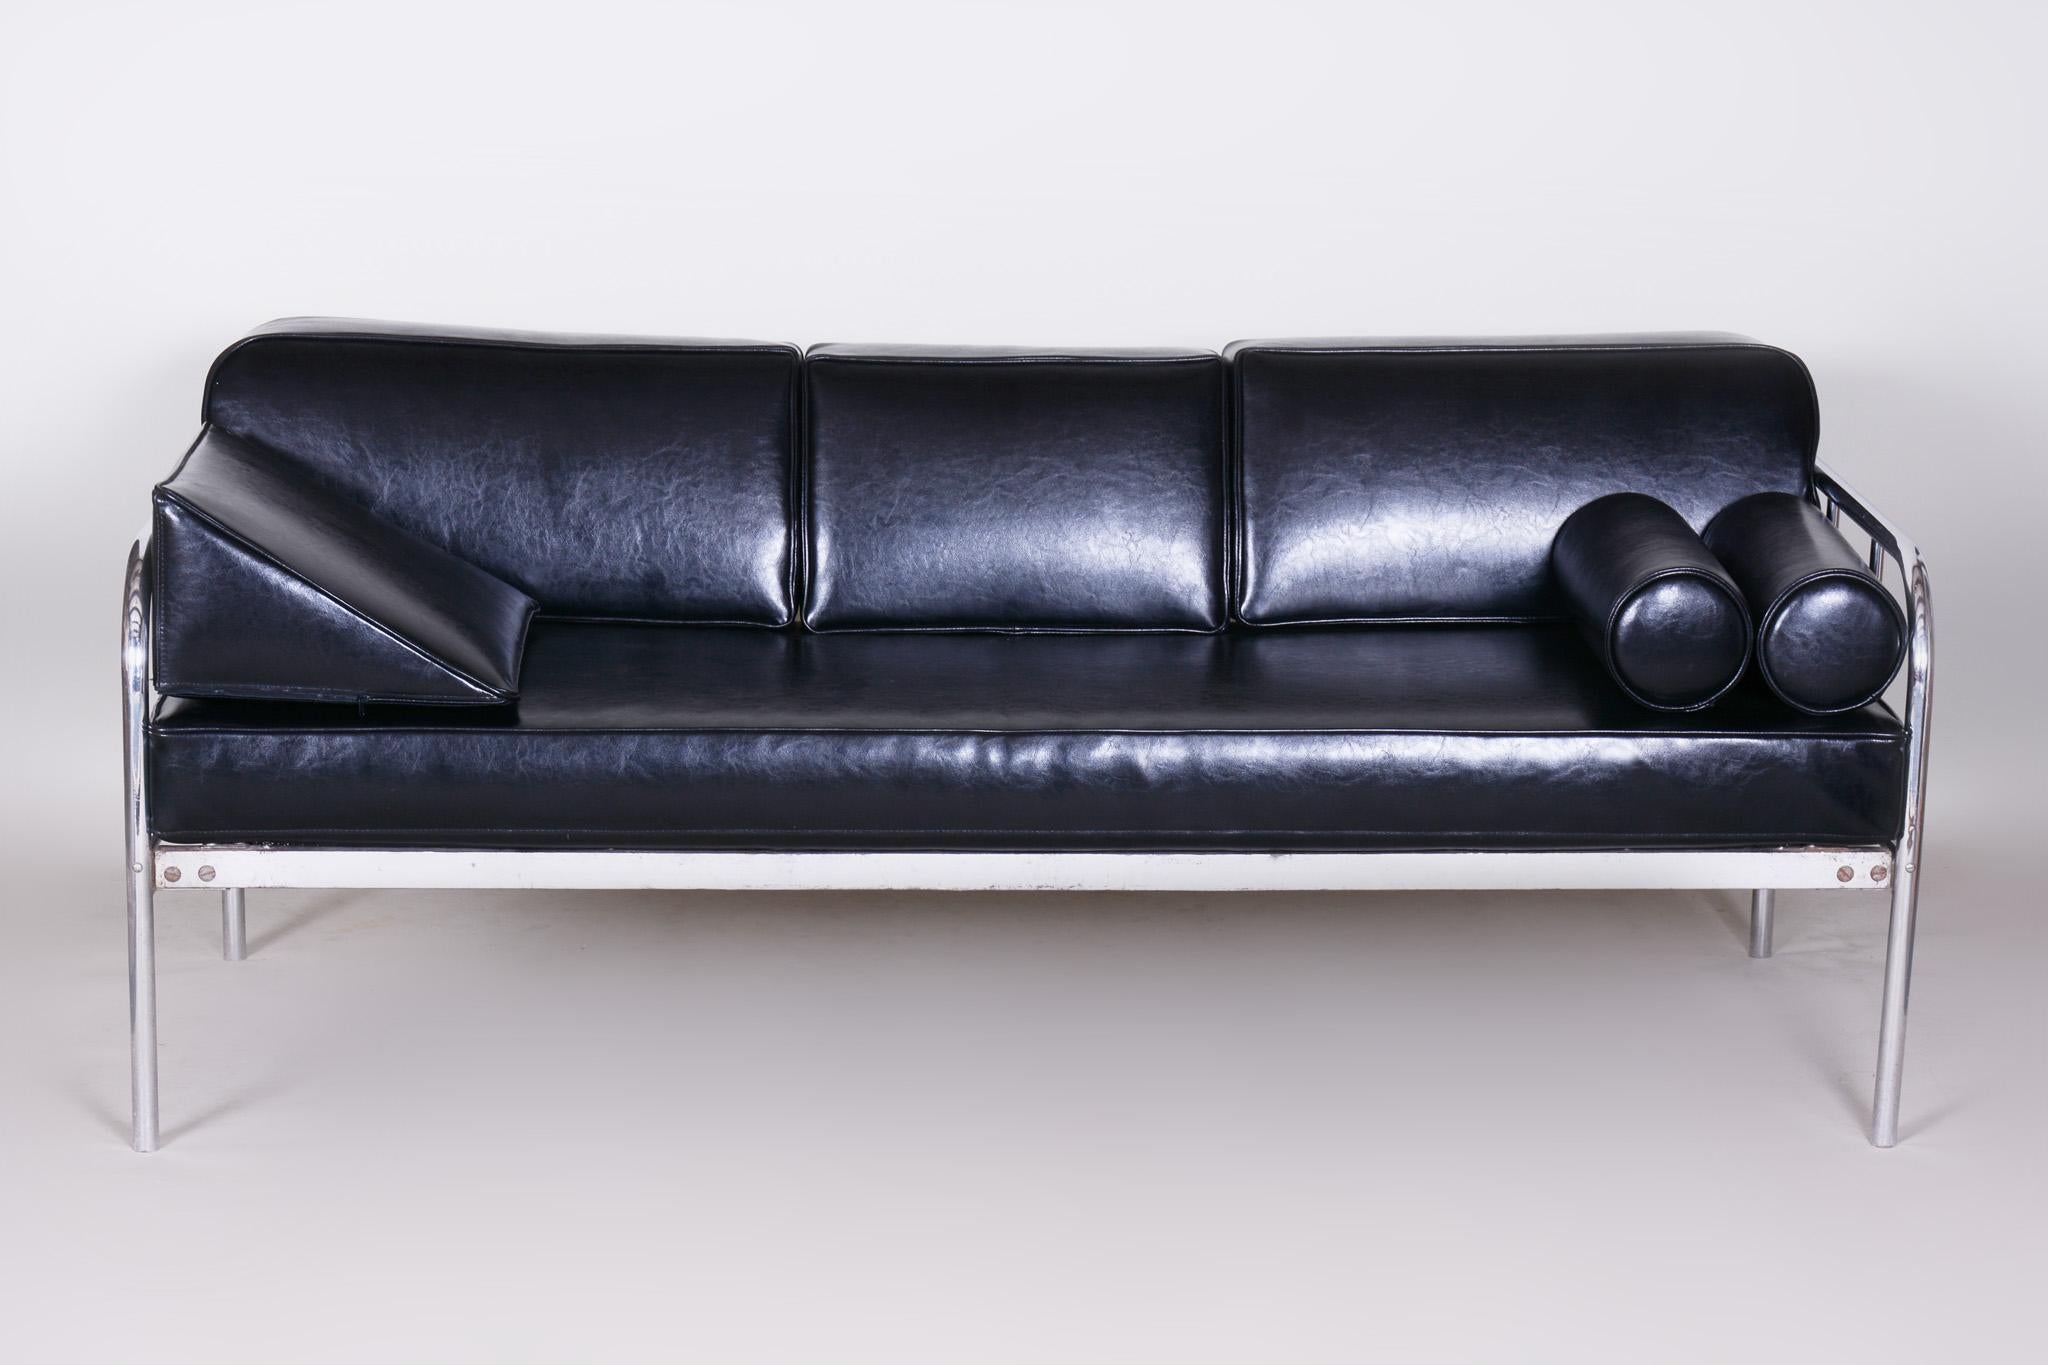 Fully Restored Bauhaus Leather and Chrome Sofa by Vichr a Spol, 1930s Czechia In Good Condition For Sale In Horomerice, CZ